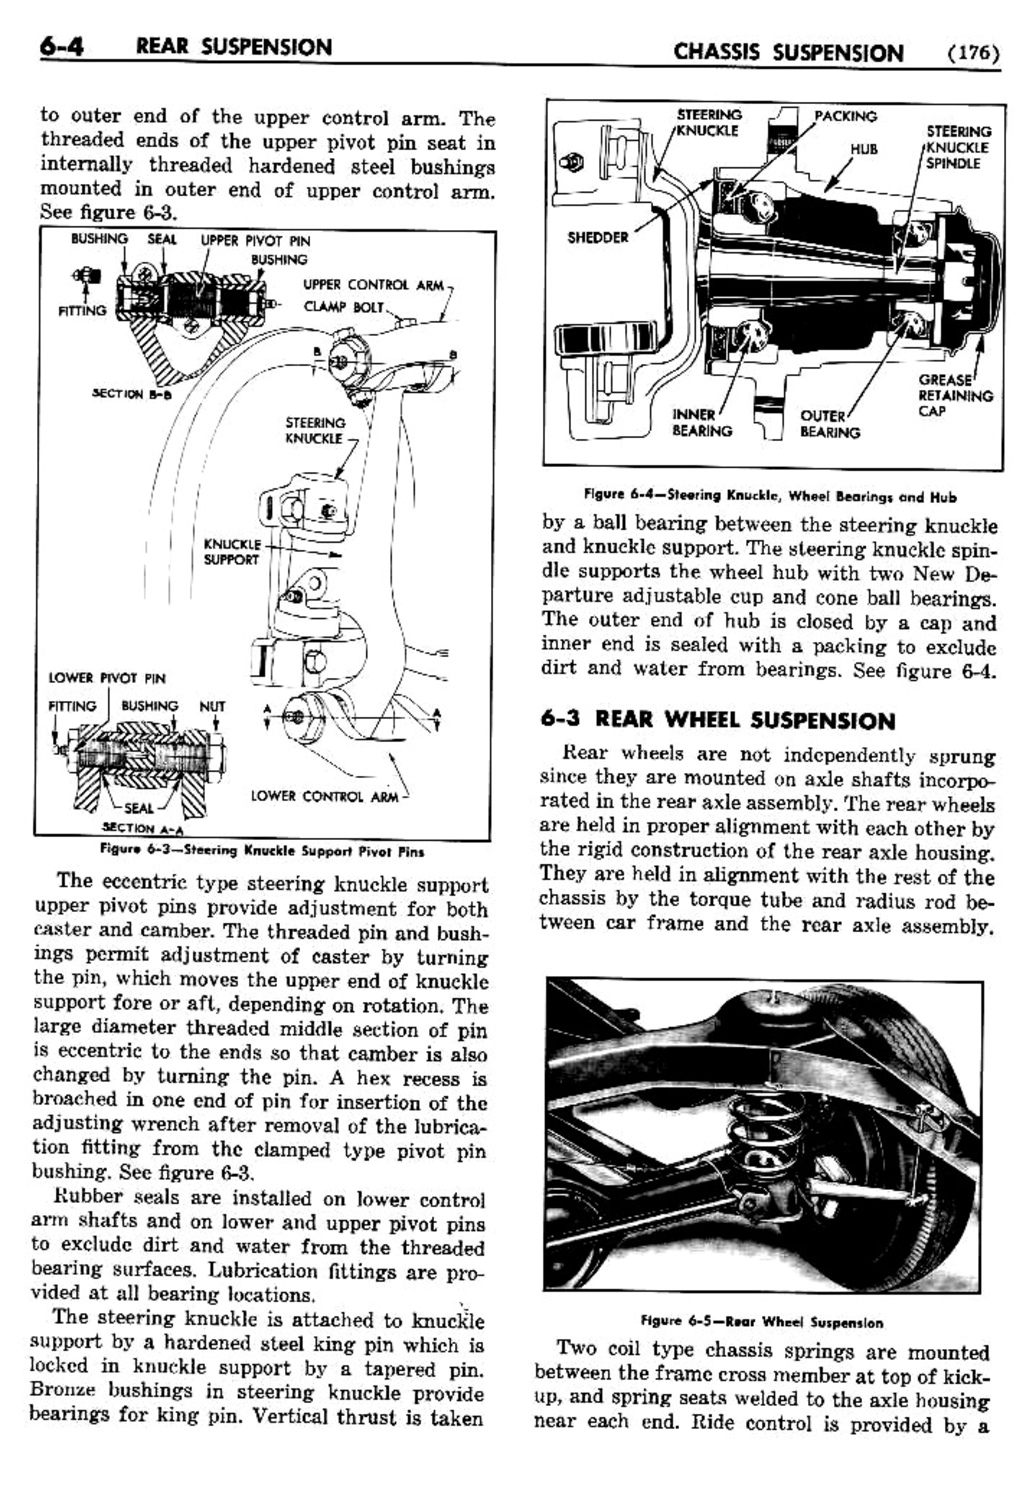 n_07 1950 Buick Shop Manual - Chassis Suspension-004-004.jpg